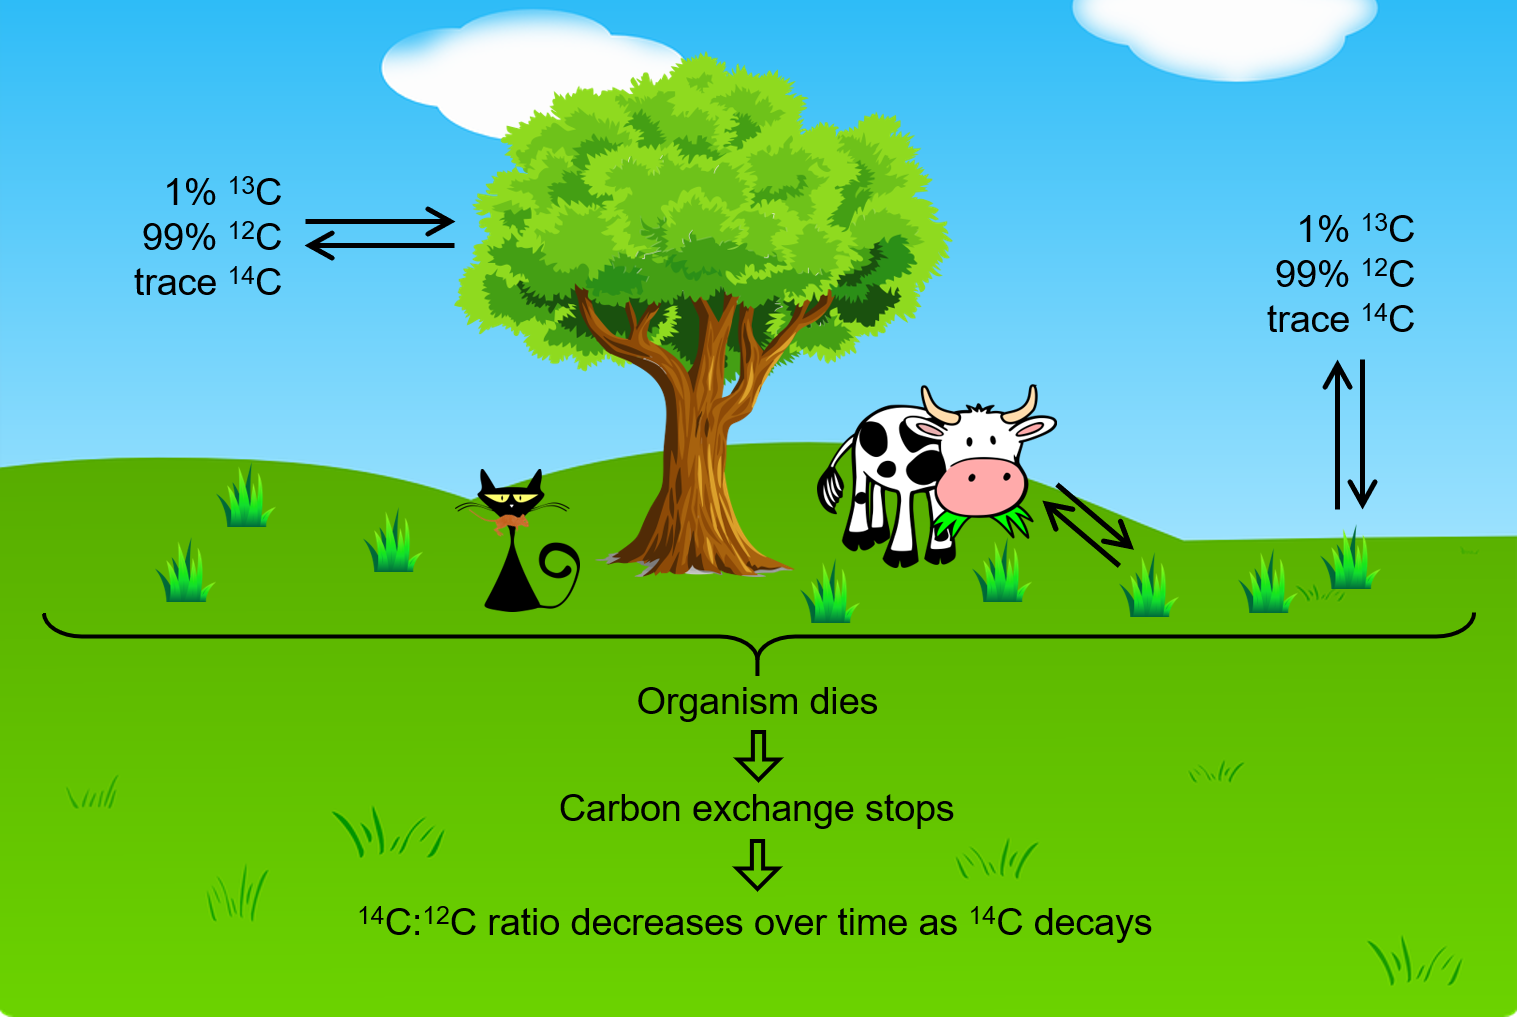 Image of a cow and tree in a field of grass. Double sided arrows point from the air to the tree. The arrows are labeled 1% carbon 13, 99% carbon 12, and trance carbon 14. Double sided arrows with the same label point from the air to the grass. The cow is seen eating the grass with double sided arrows as well. Beneath the ground, text reads "organism dies. Carbon exchange stops, C14 to C12 ratio decreases over time as C14 decays.